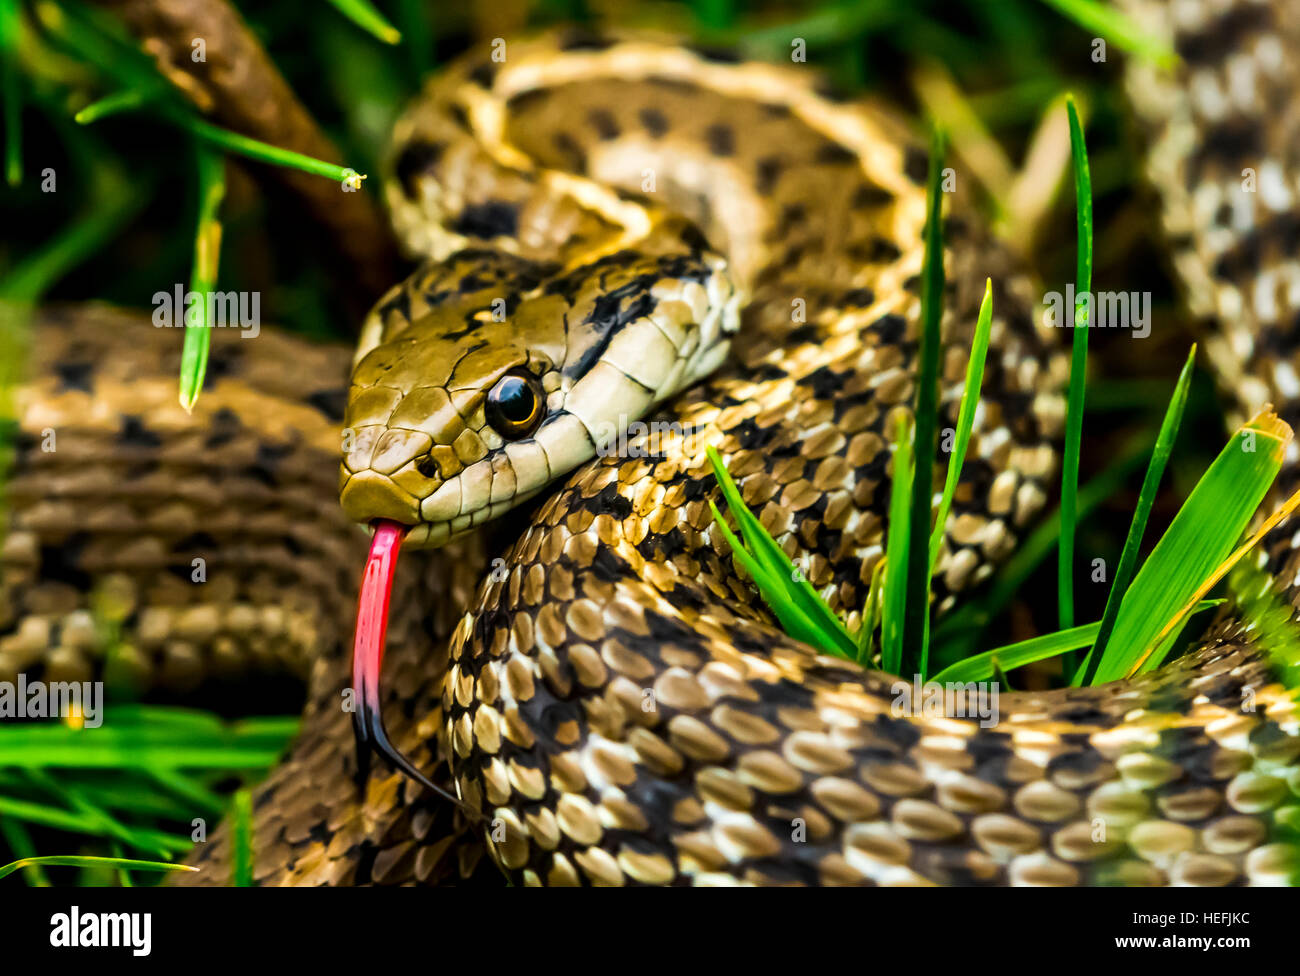 Snake in the grass with forked tongue exposed. Sharp eye and head. Bright vibrant color Stock Photo